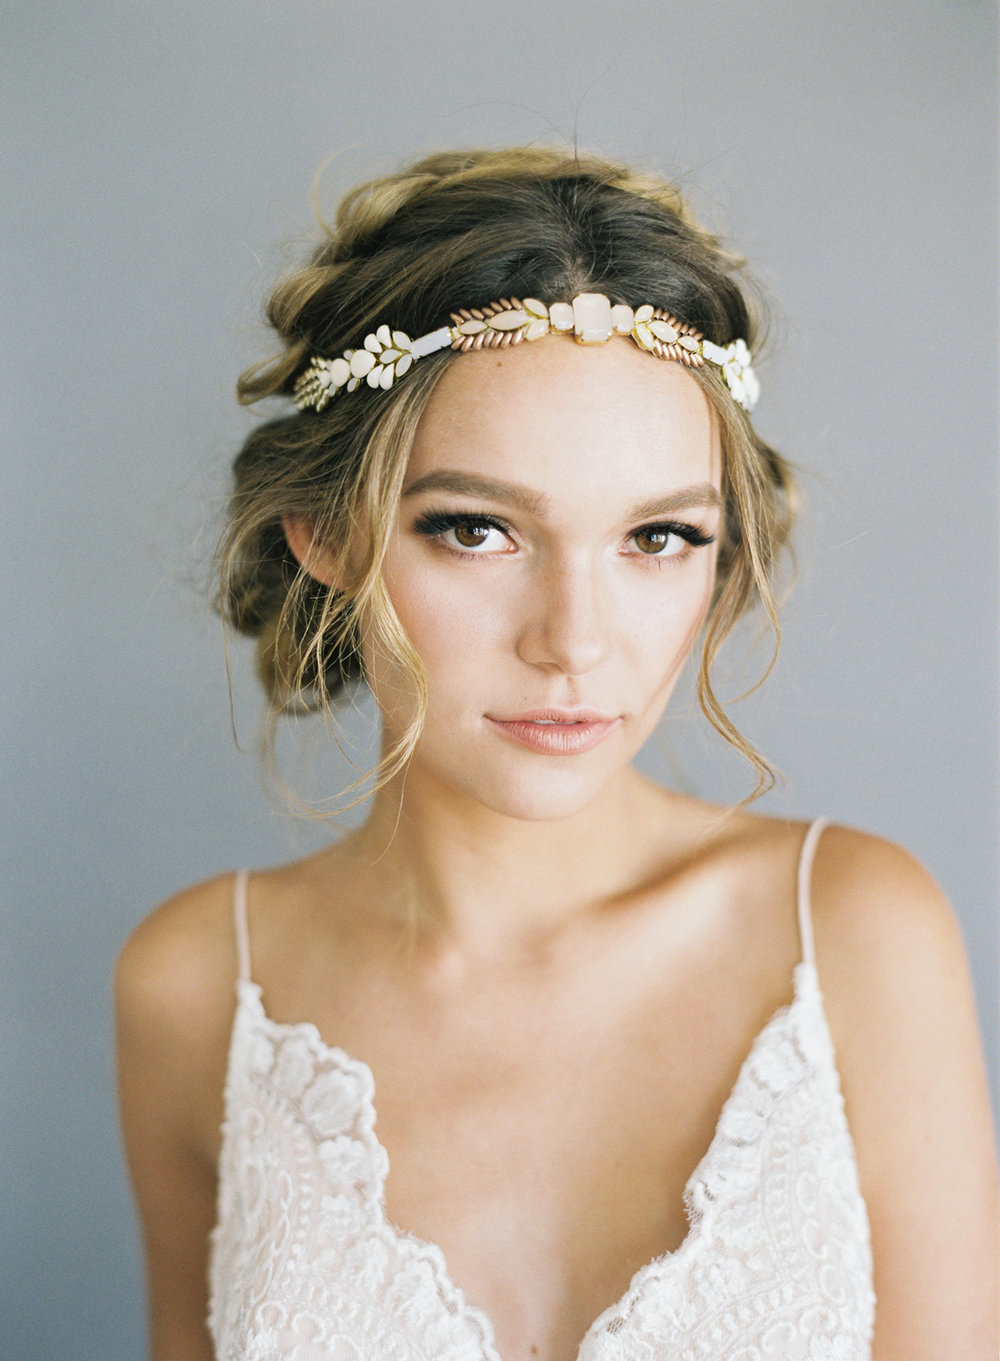 Hushed Commotion, Jen Huang, Piper blush beaded head piece.jpg